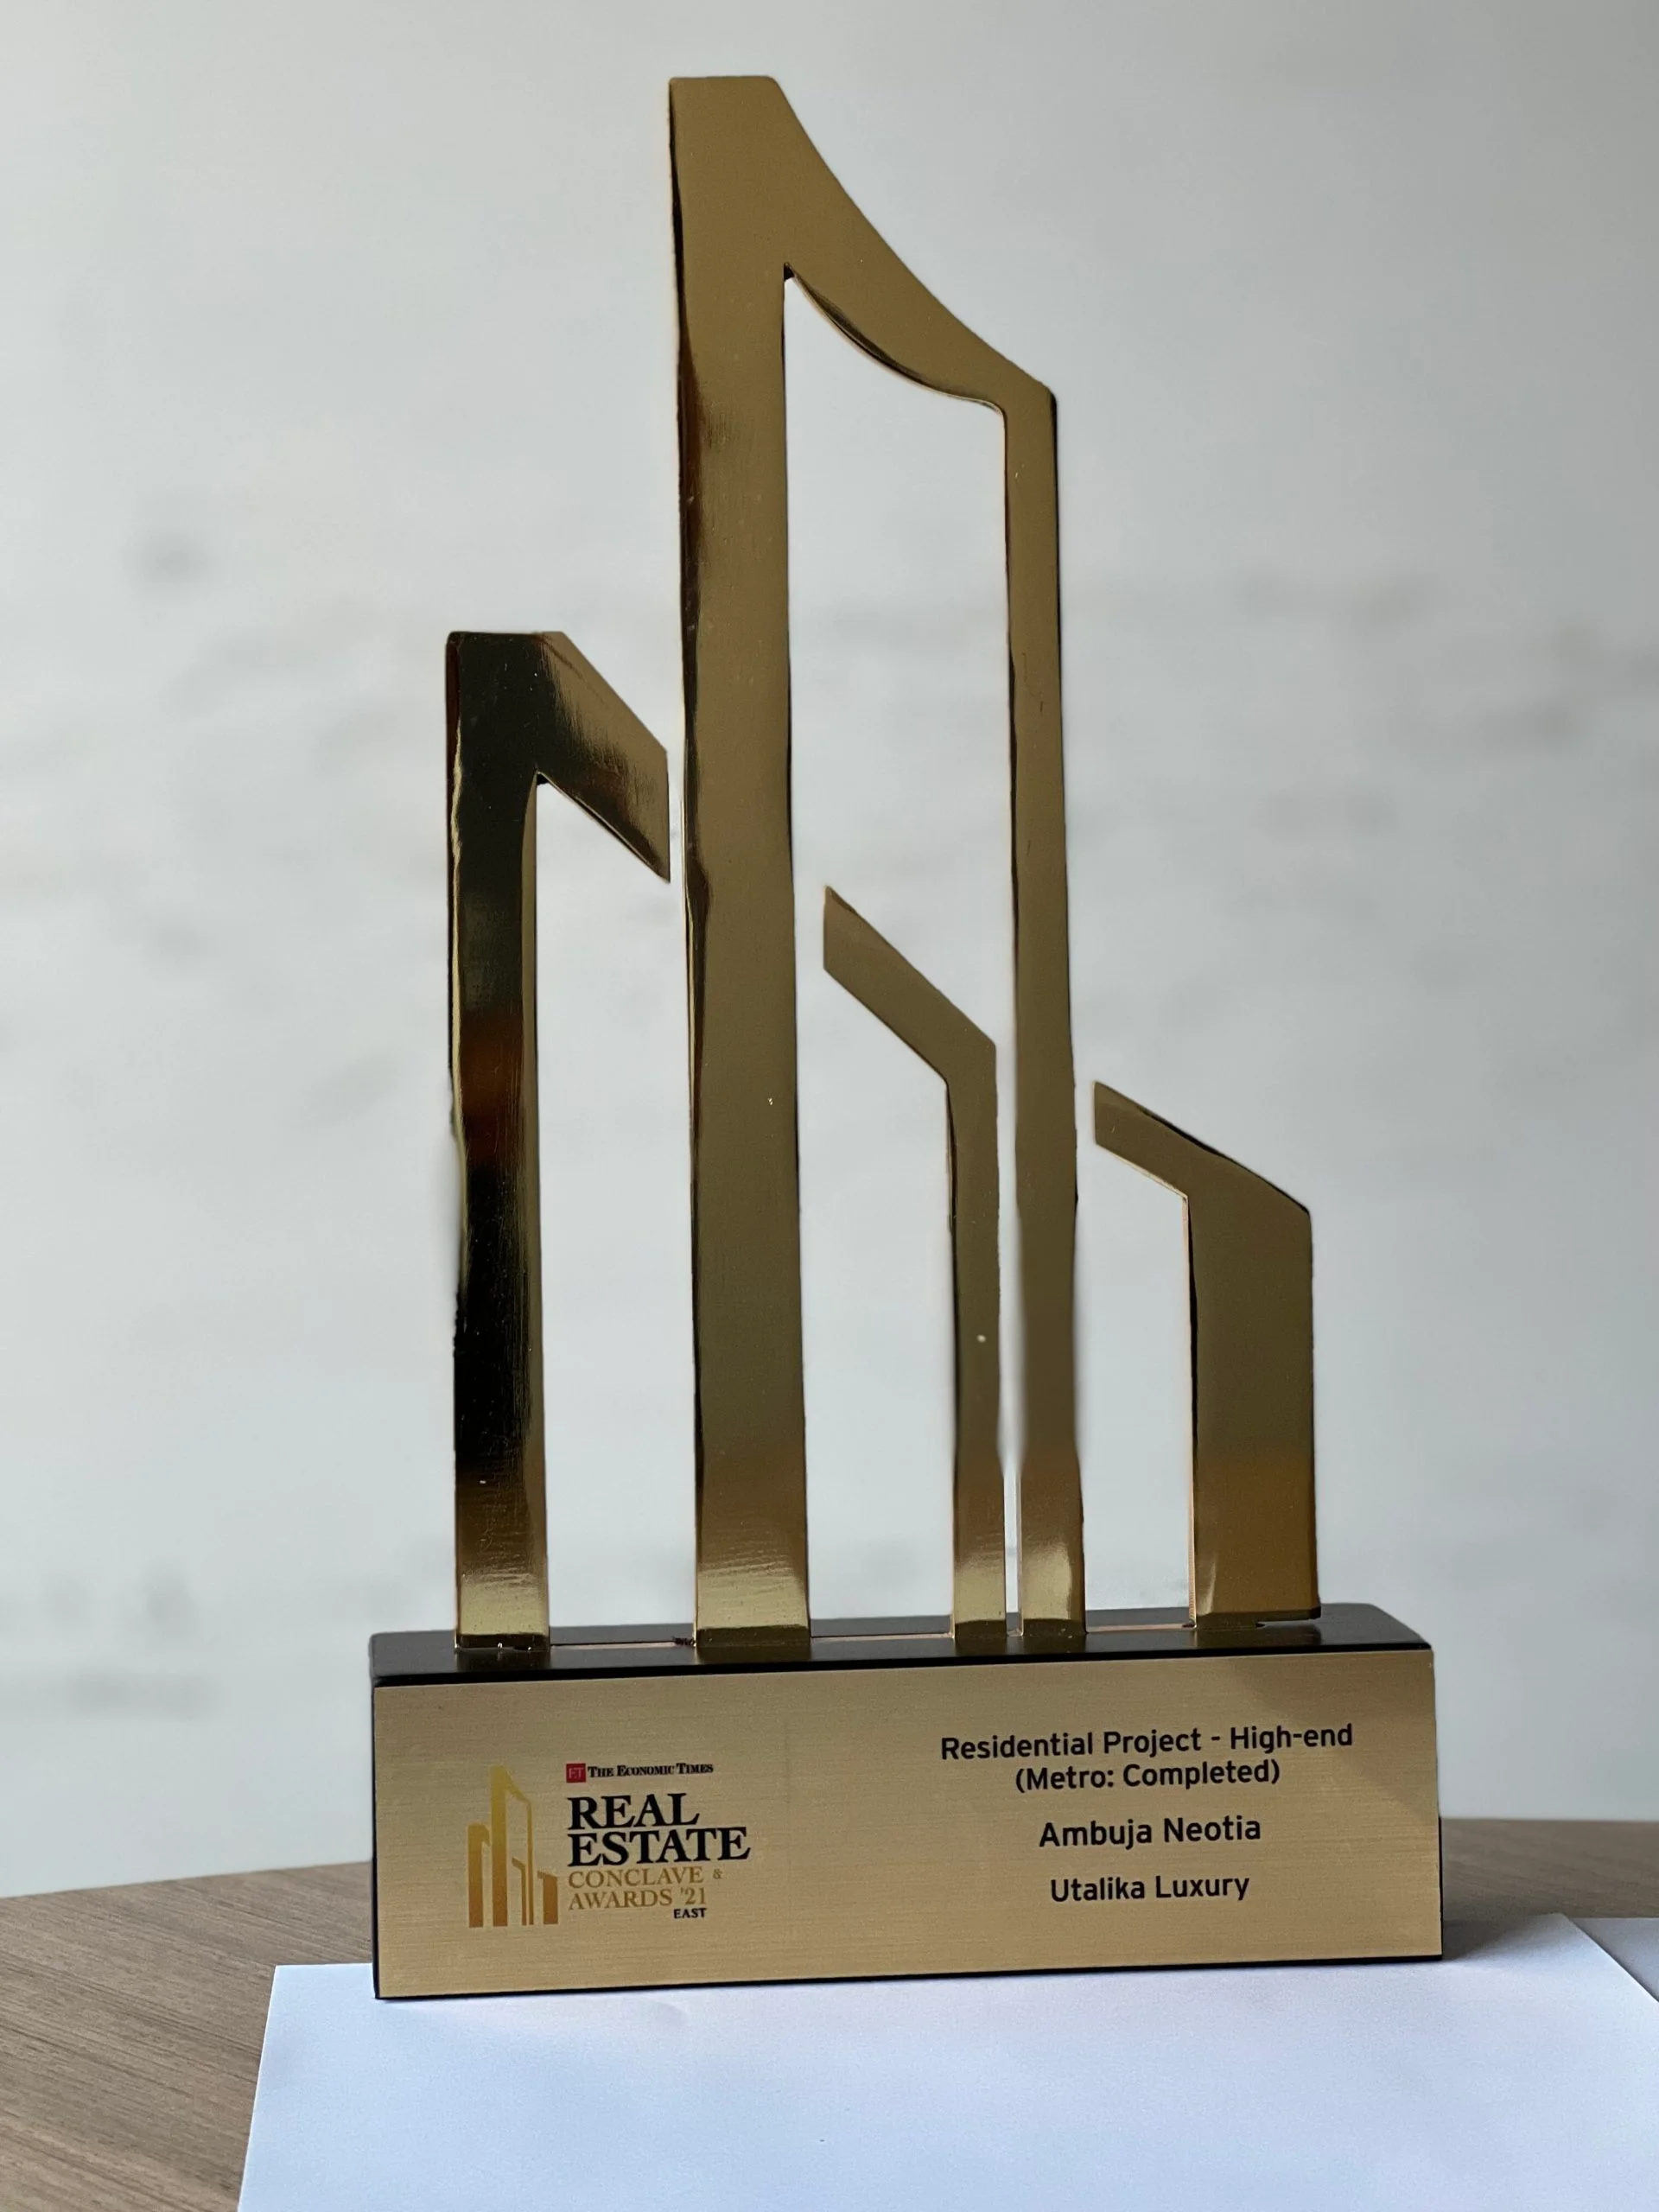 ET Real Estate Award 2021 East for “Best Residential Project Completed – High End (Metro)